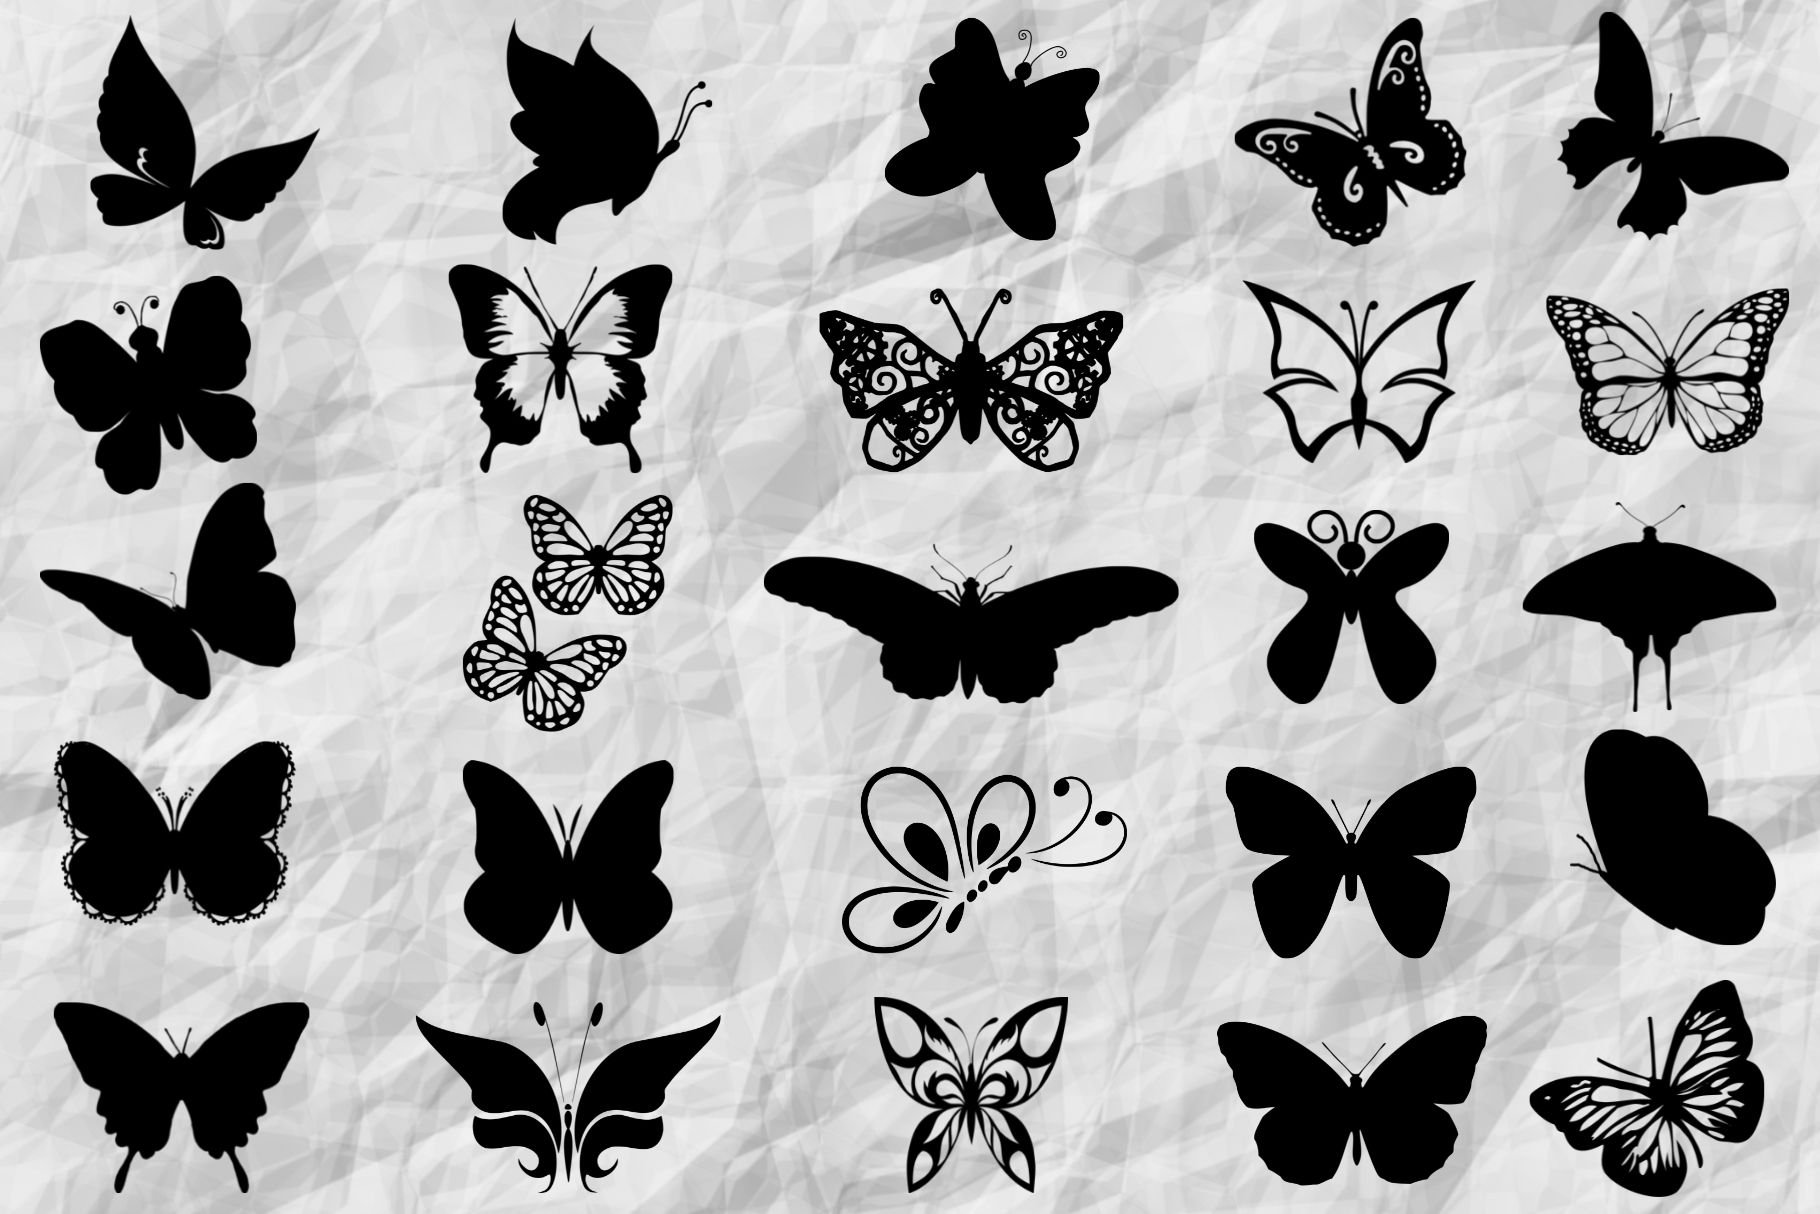 Butterfly Silhouette cover image.